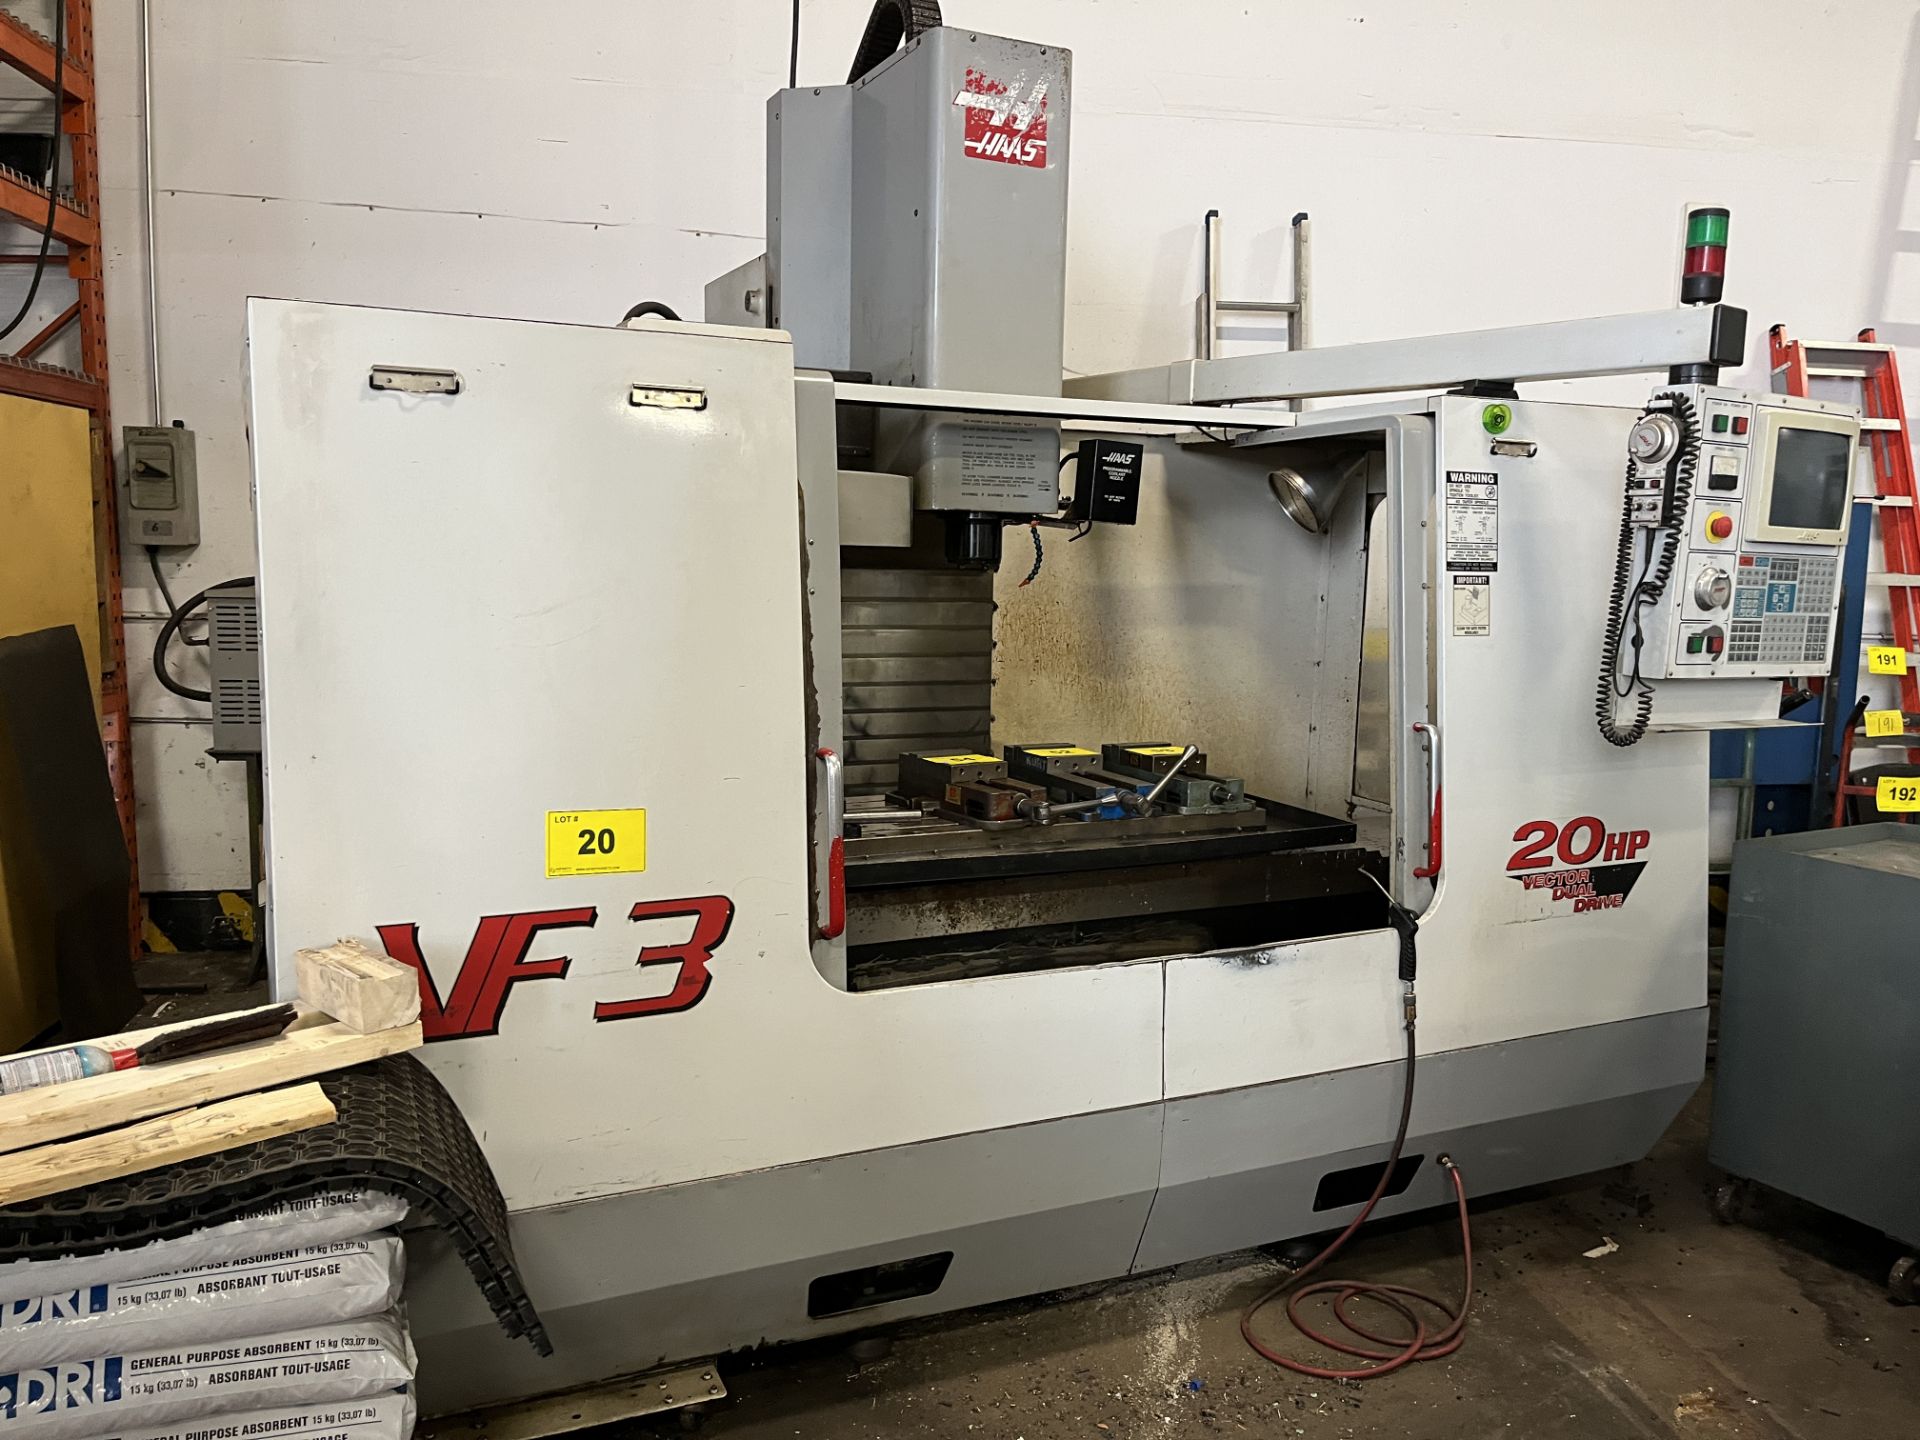 2000 HAAS VF3 CNC VERTICAL MACHINING CENTER, CNC CONTROL, TRAVELS: X-40”, Y-20”, Z-25”, 18” X 48” - Image 14 of 14